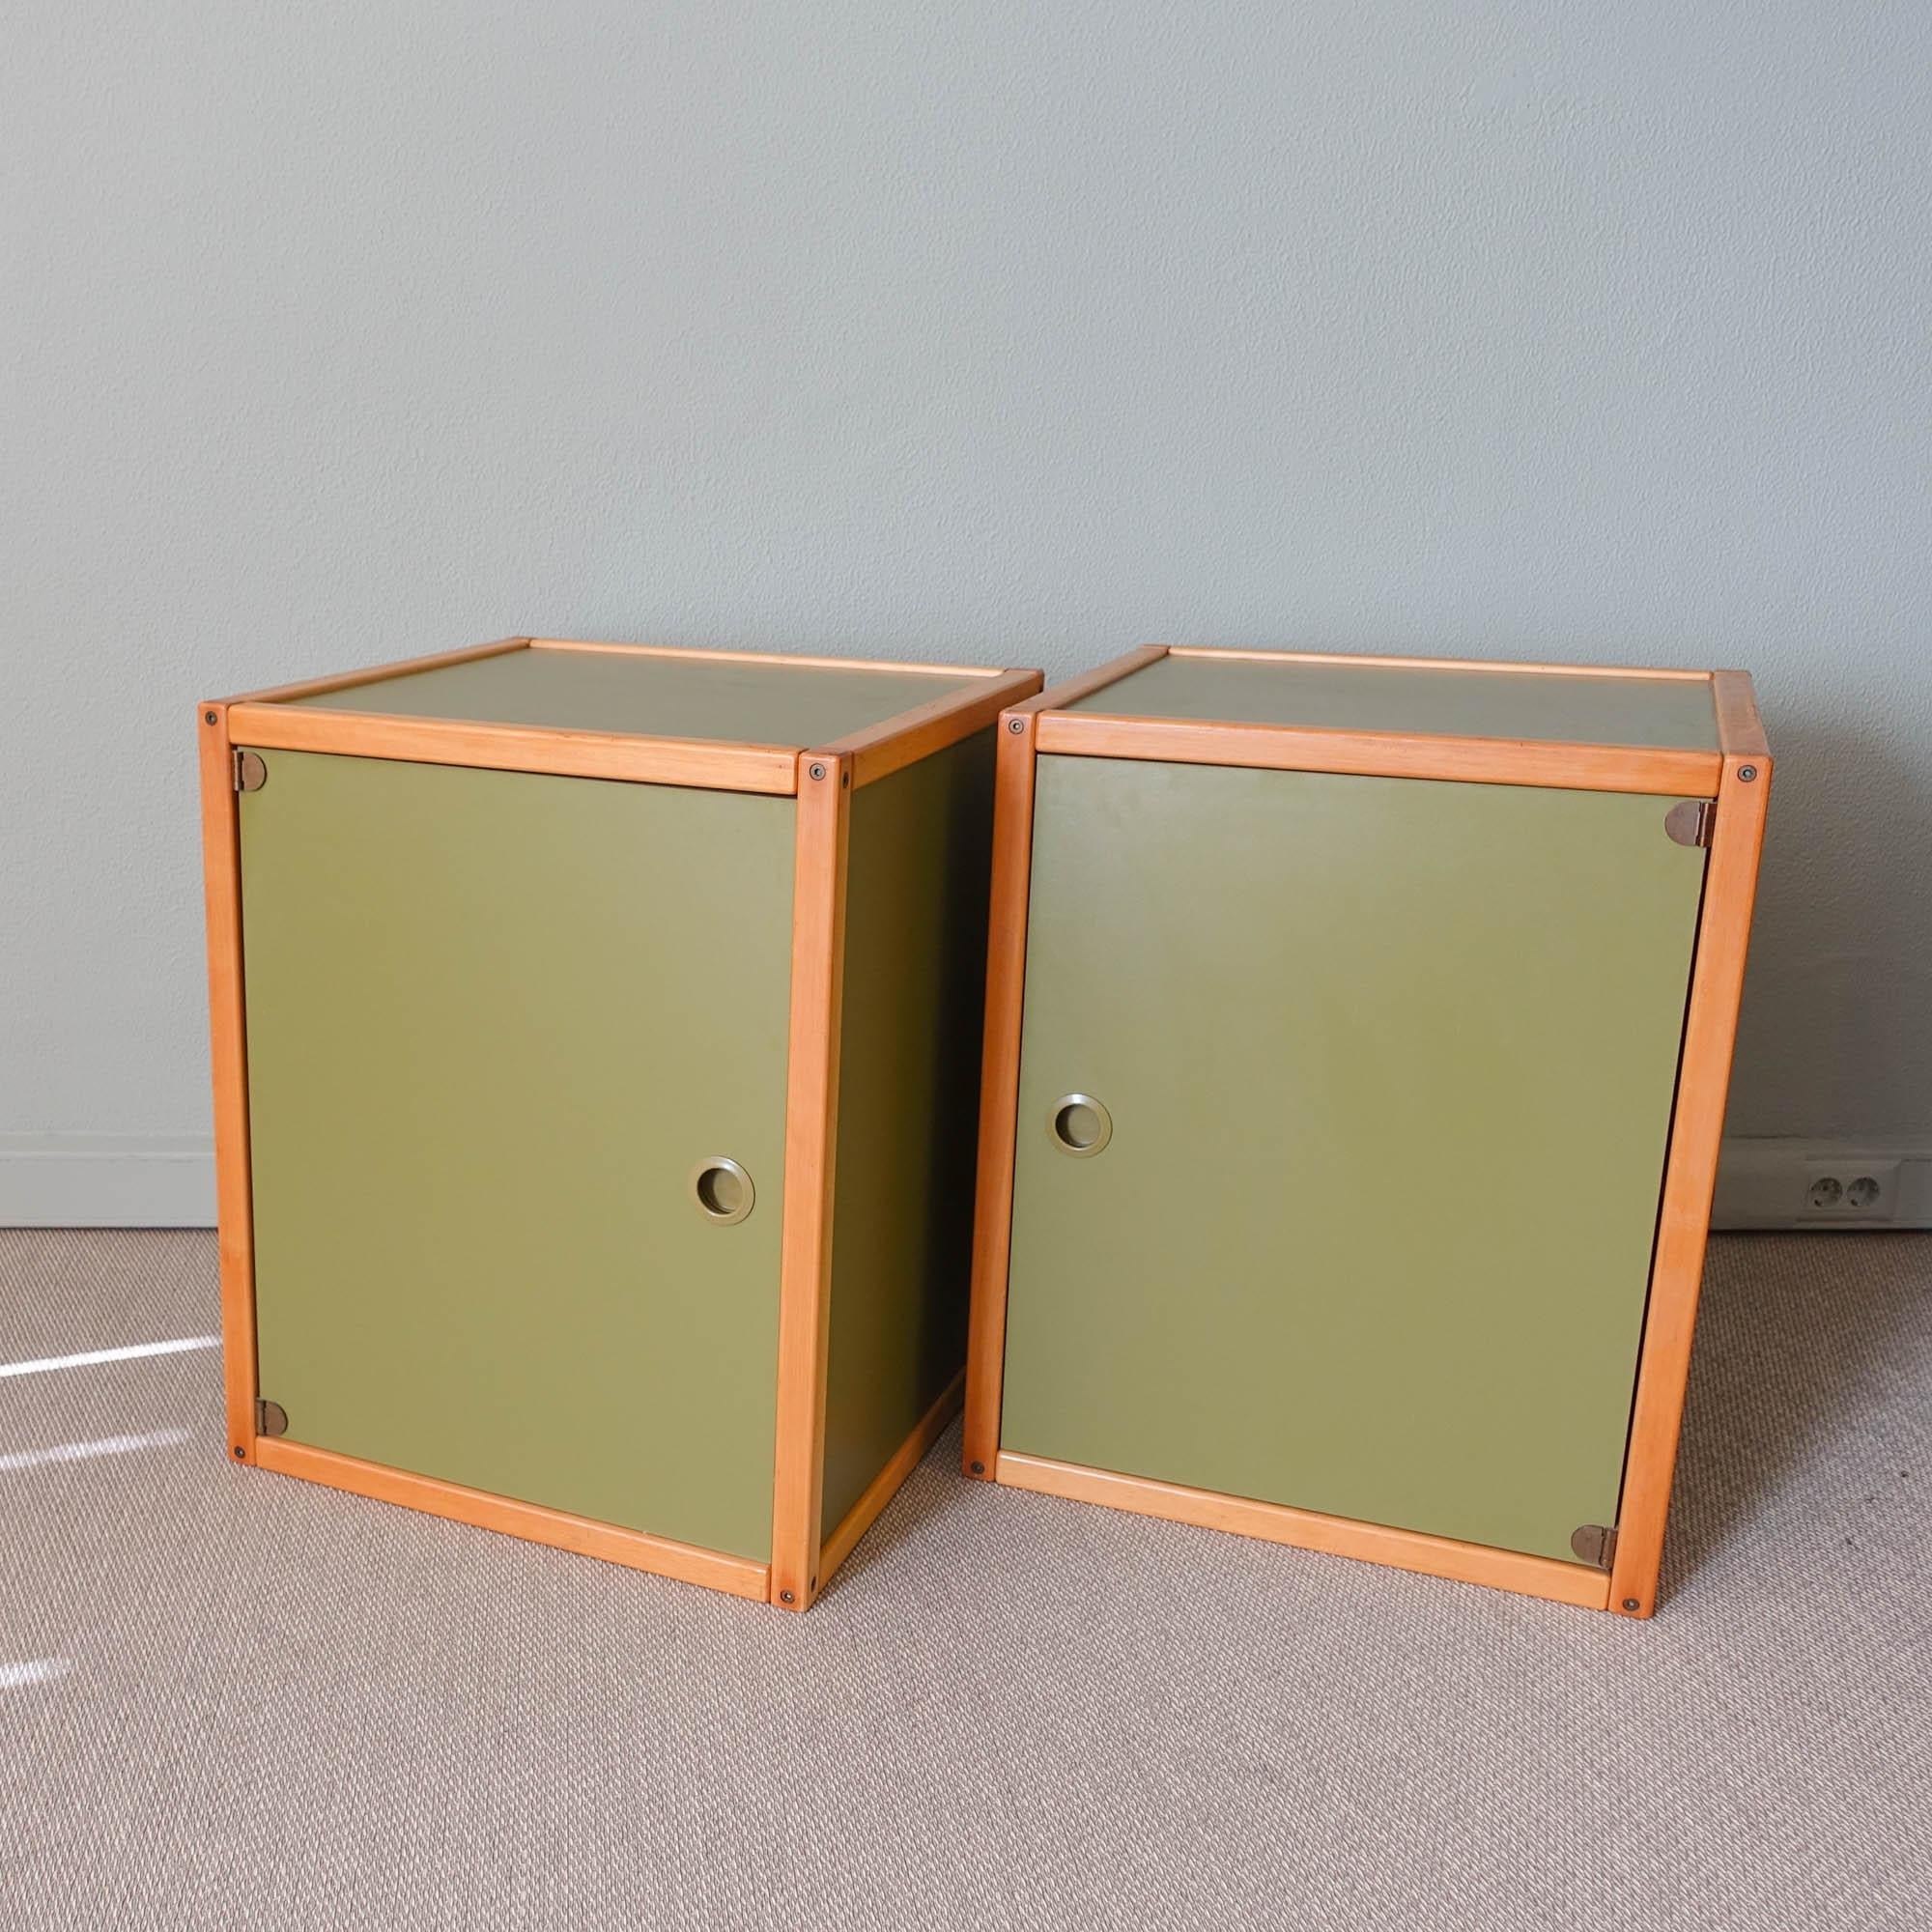 Pair of Vintage Profilsystem Collection Storage Units by Elmar Flötotto For Sale 1